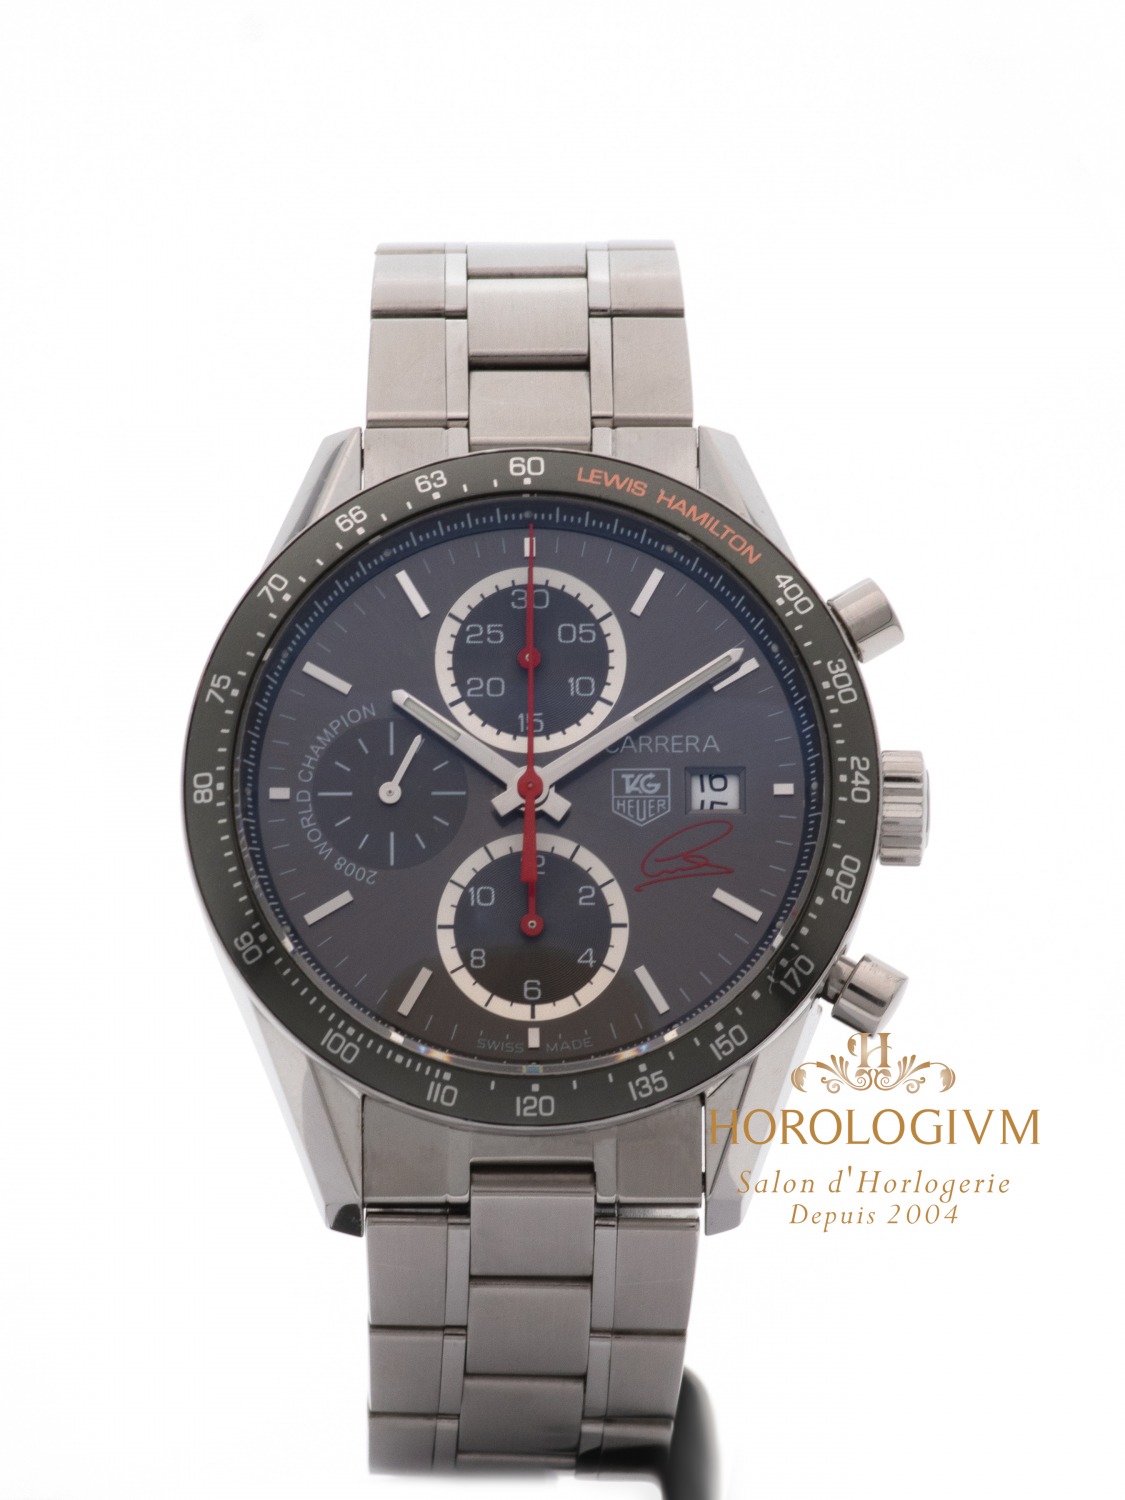 Tag Heuer Carrera Chronograph Date Calibre 16 Limited 2500 pcs Ref. CV201M, watch, silver